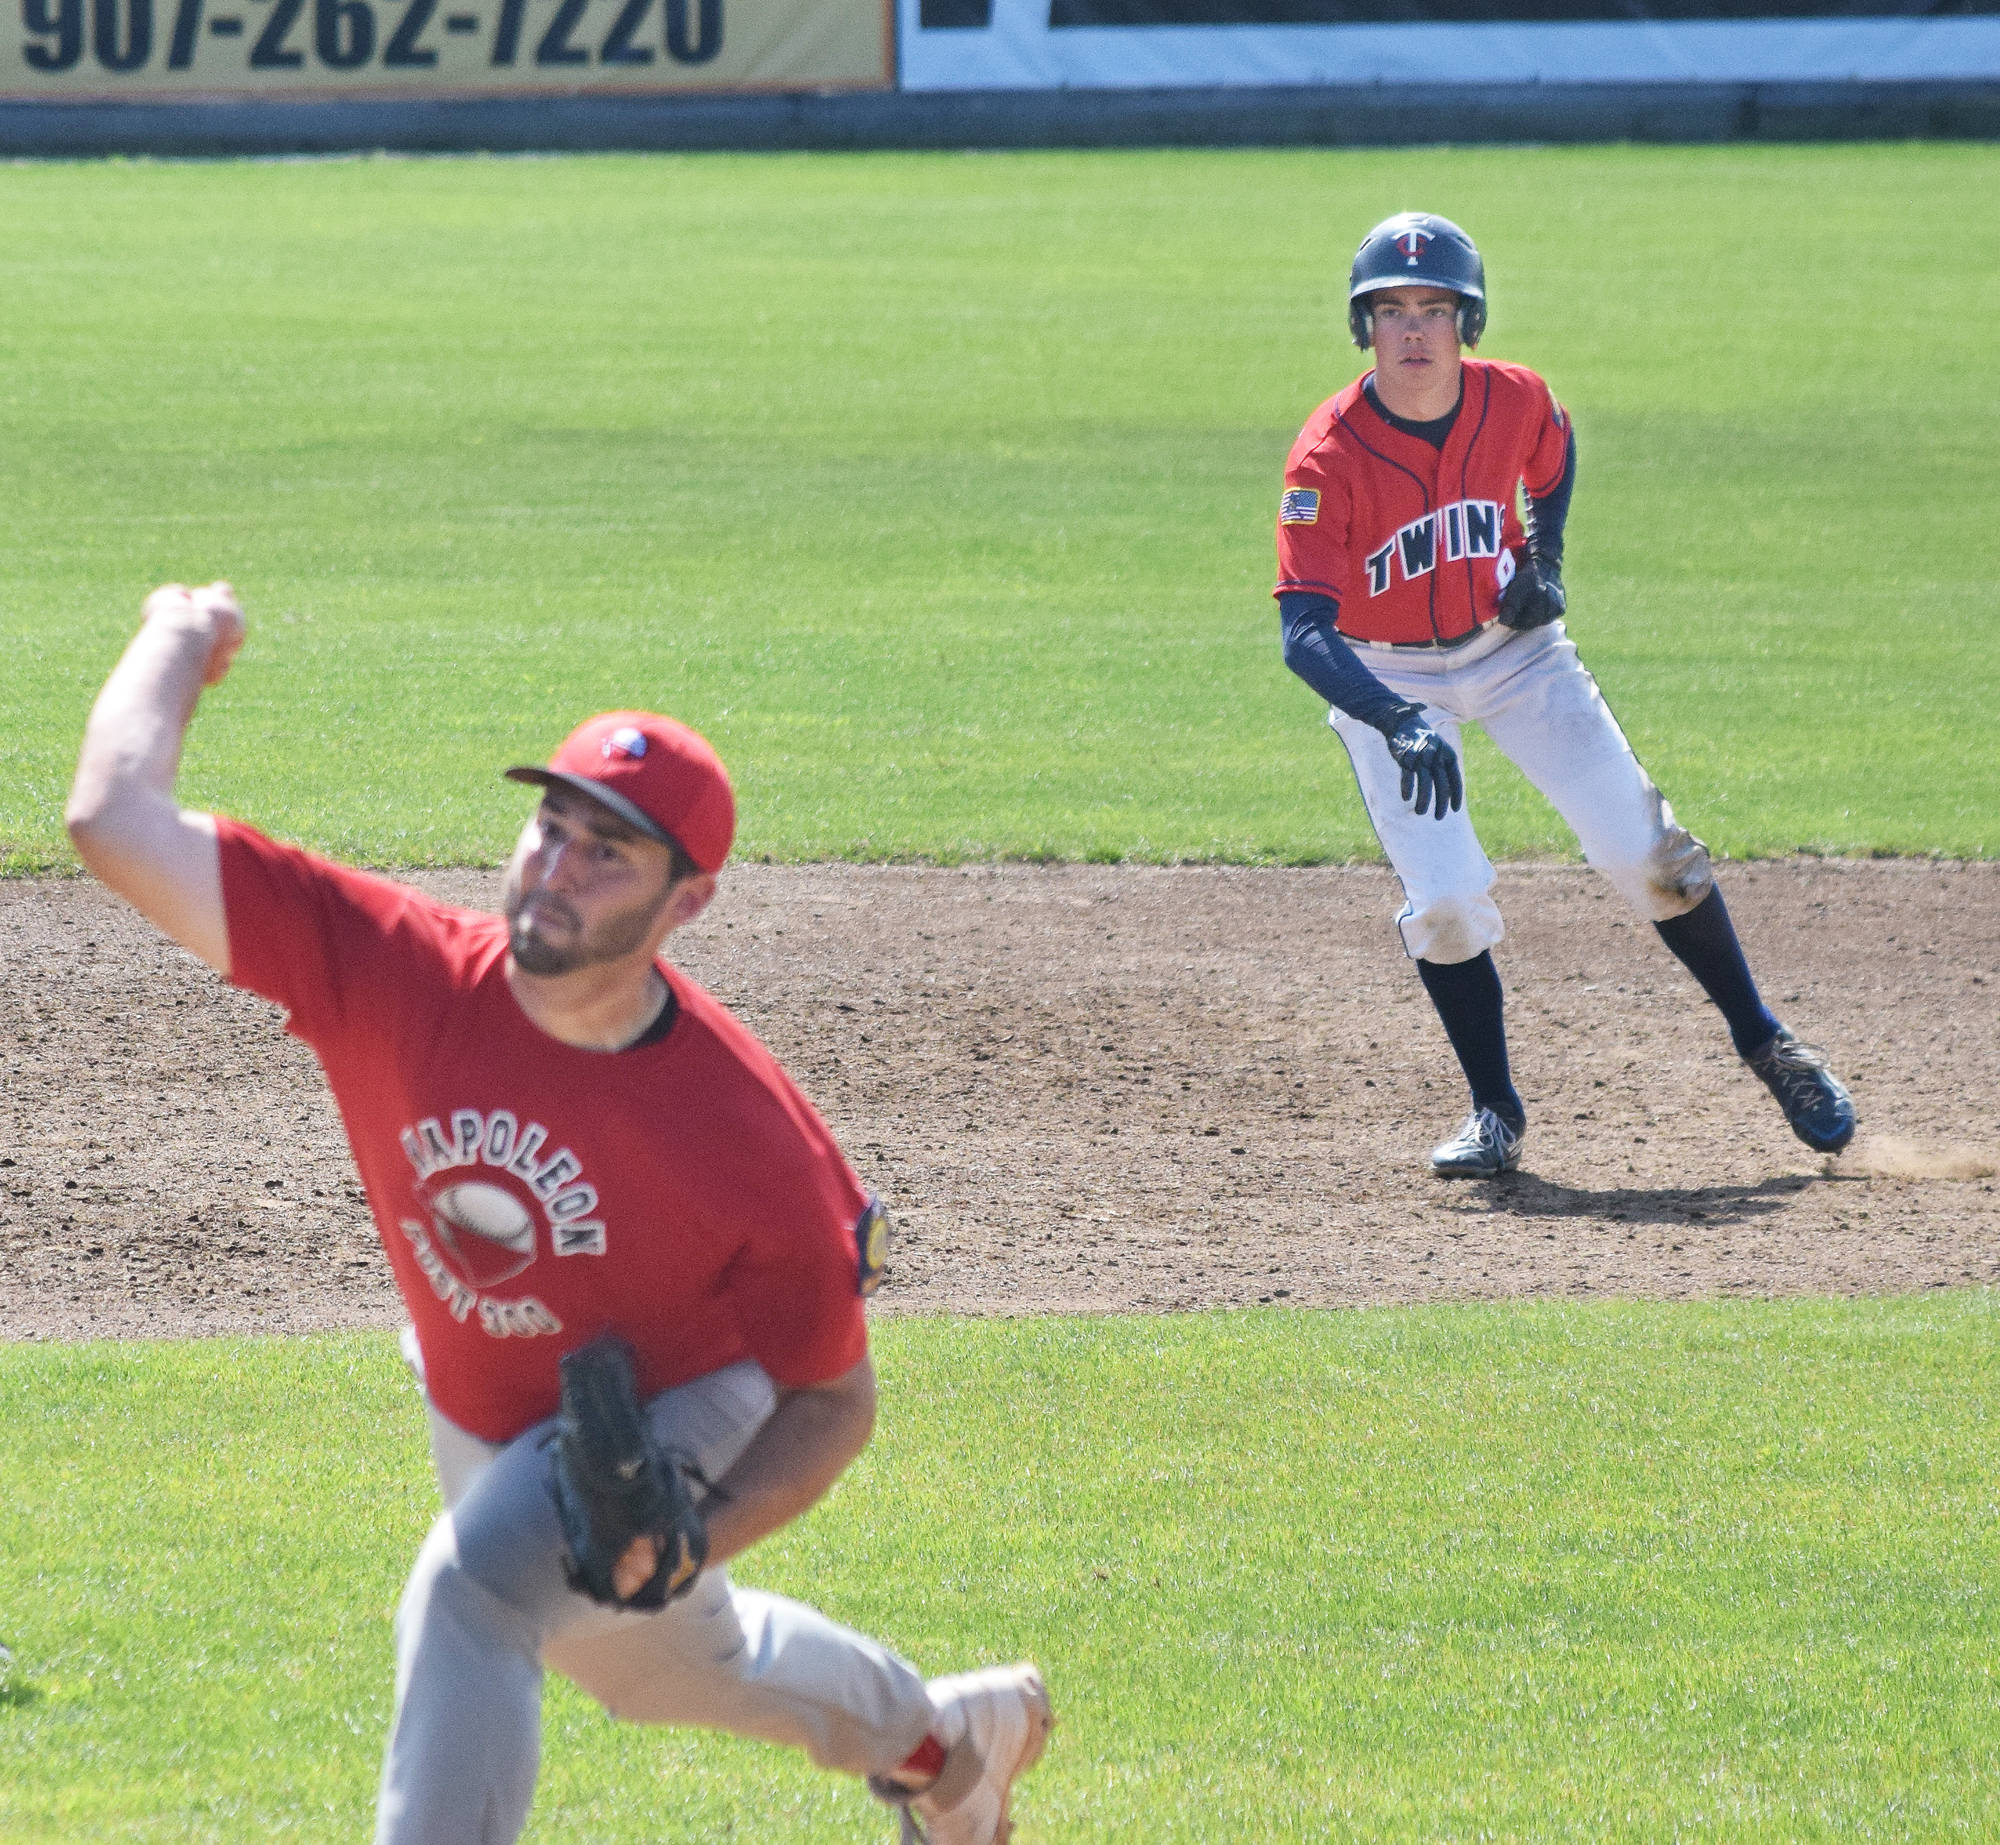 Post 20 Twins outfielder Spencer Warren (9) keeps an eye on Napoleon, Ohio, pitcher Kody King late in the game Wednesday at the Bill Miller Wood Bat Tournament at Coral Seymour Memorial Ballpark in Kenai. (Photo by Joey Klecka/Peninsula Clarion)